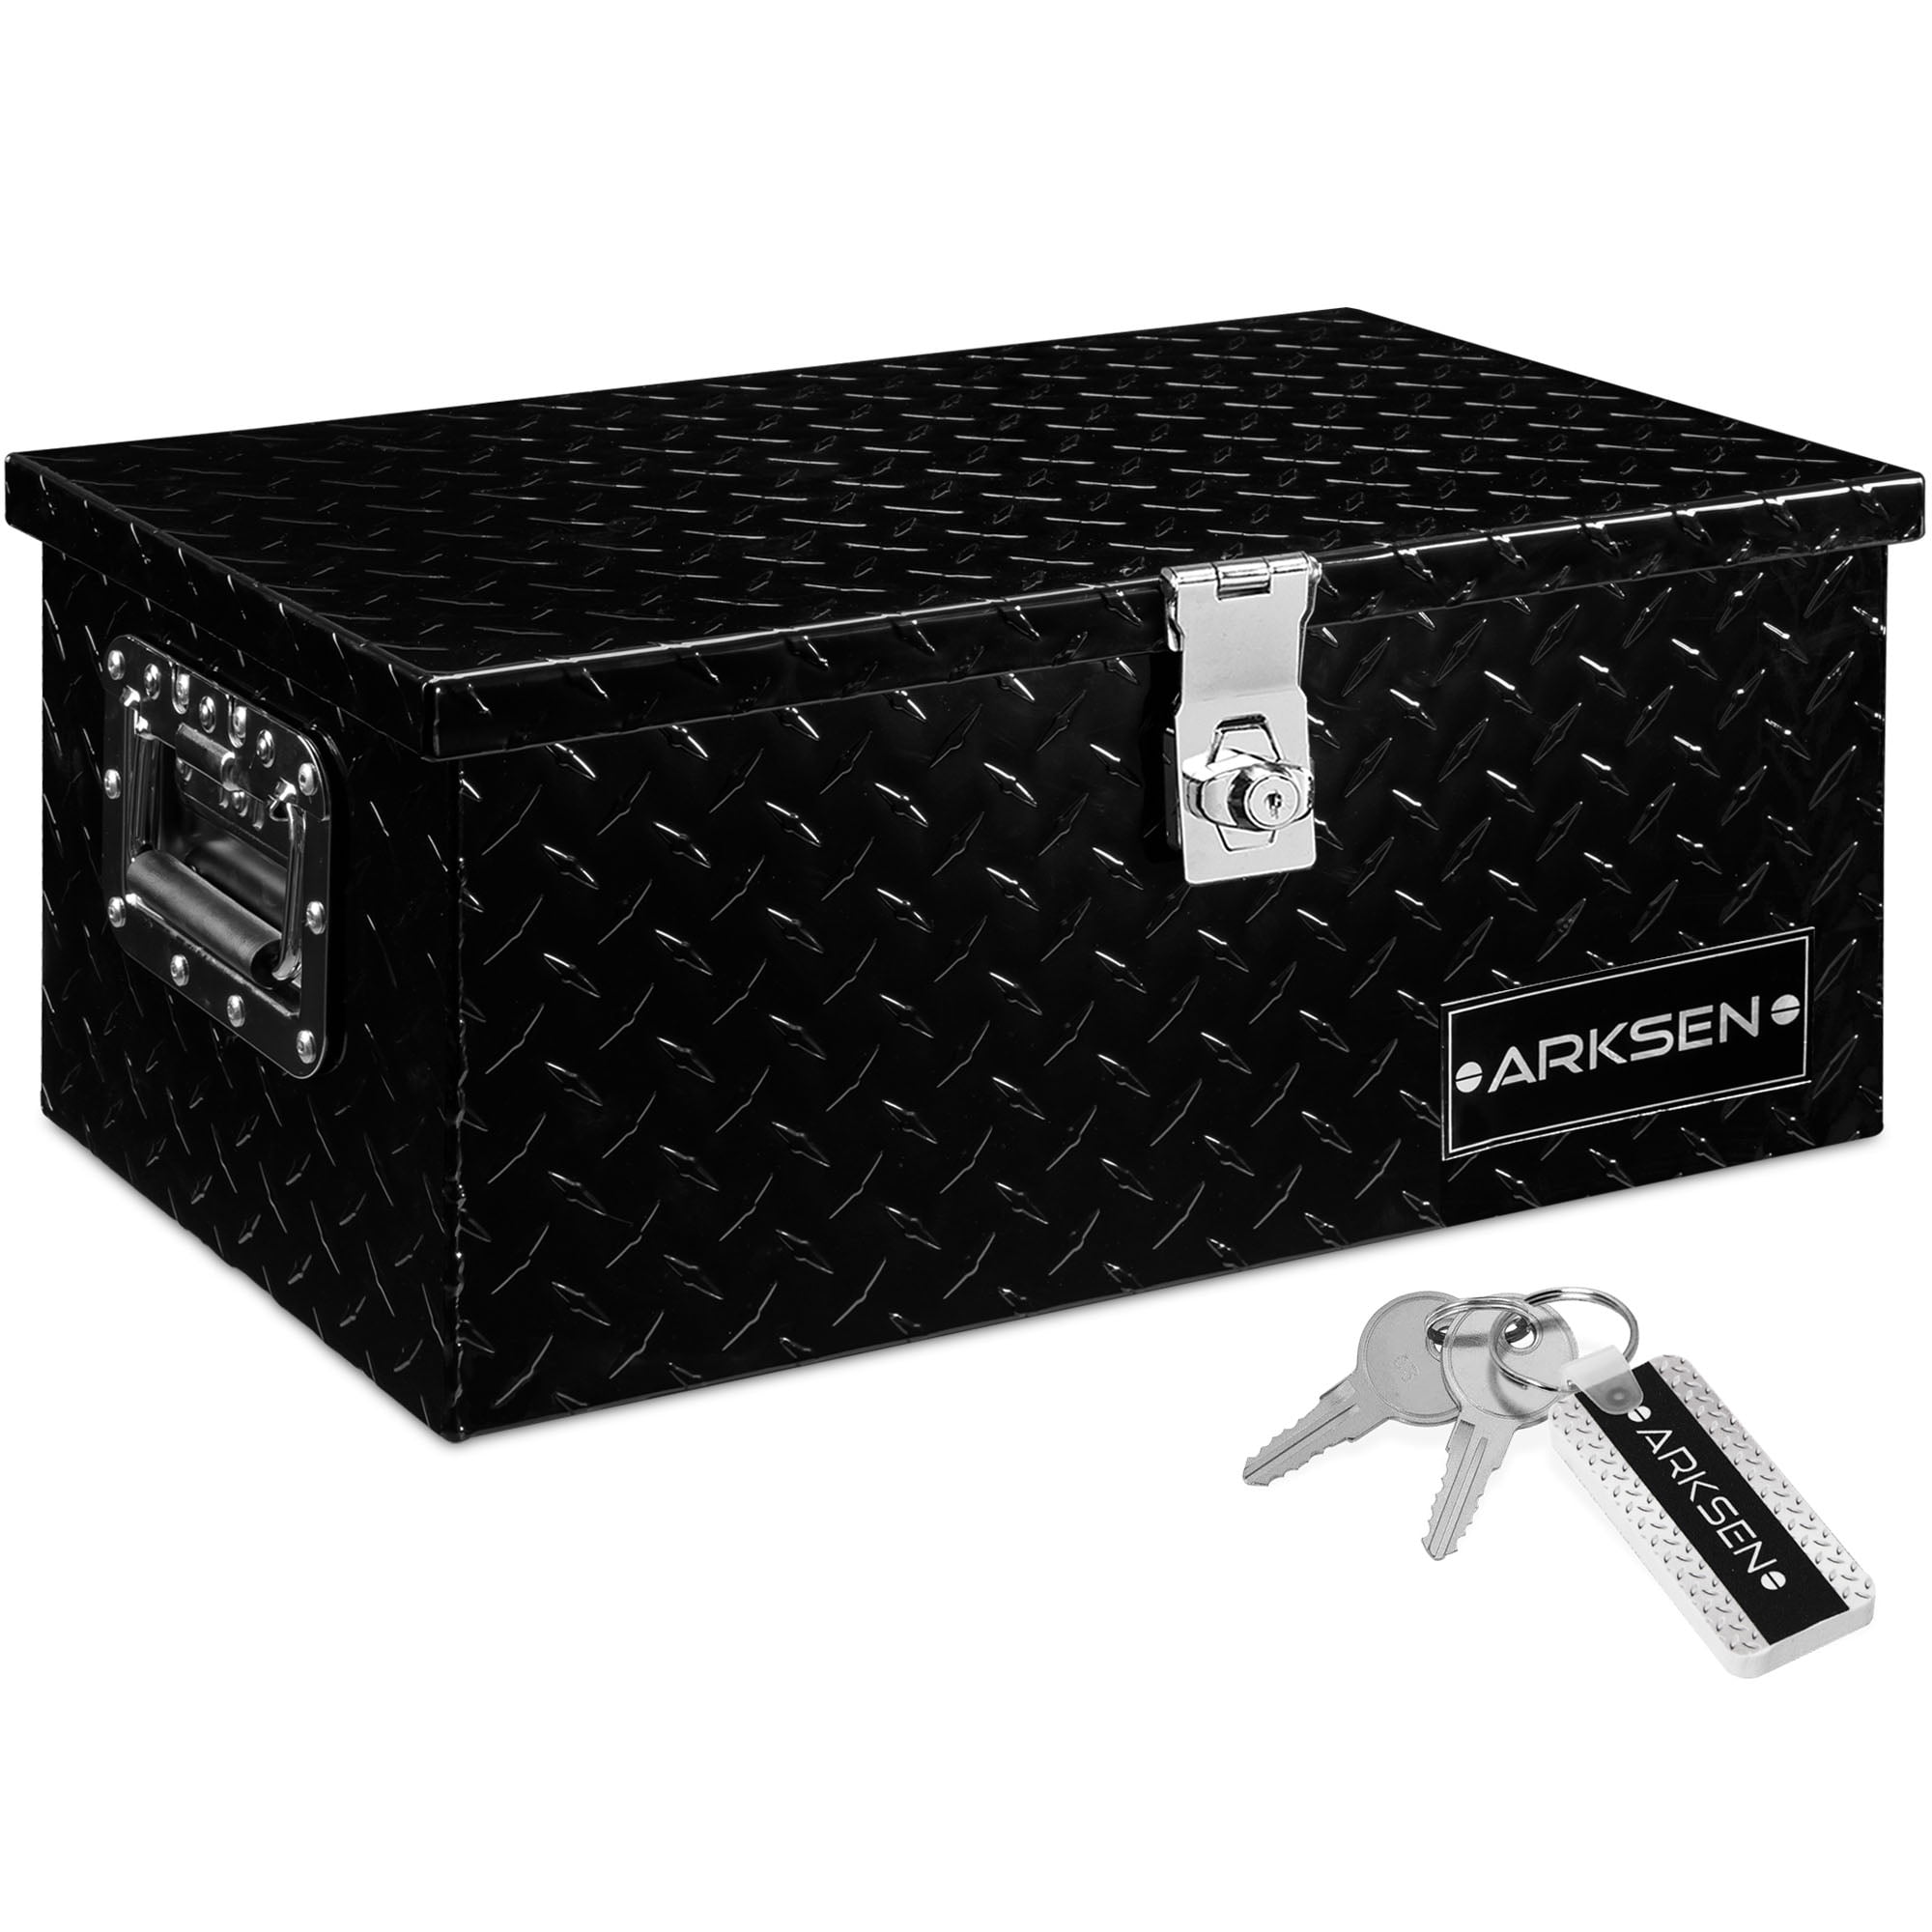 Silver ARKSEN 39 Aluminum Diamond Plate Tool Box Chest Box Pick Up Truck Bed RV Trailer Toolbox Storage With Side Handle And Lock Keys